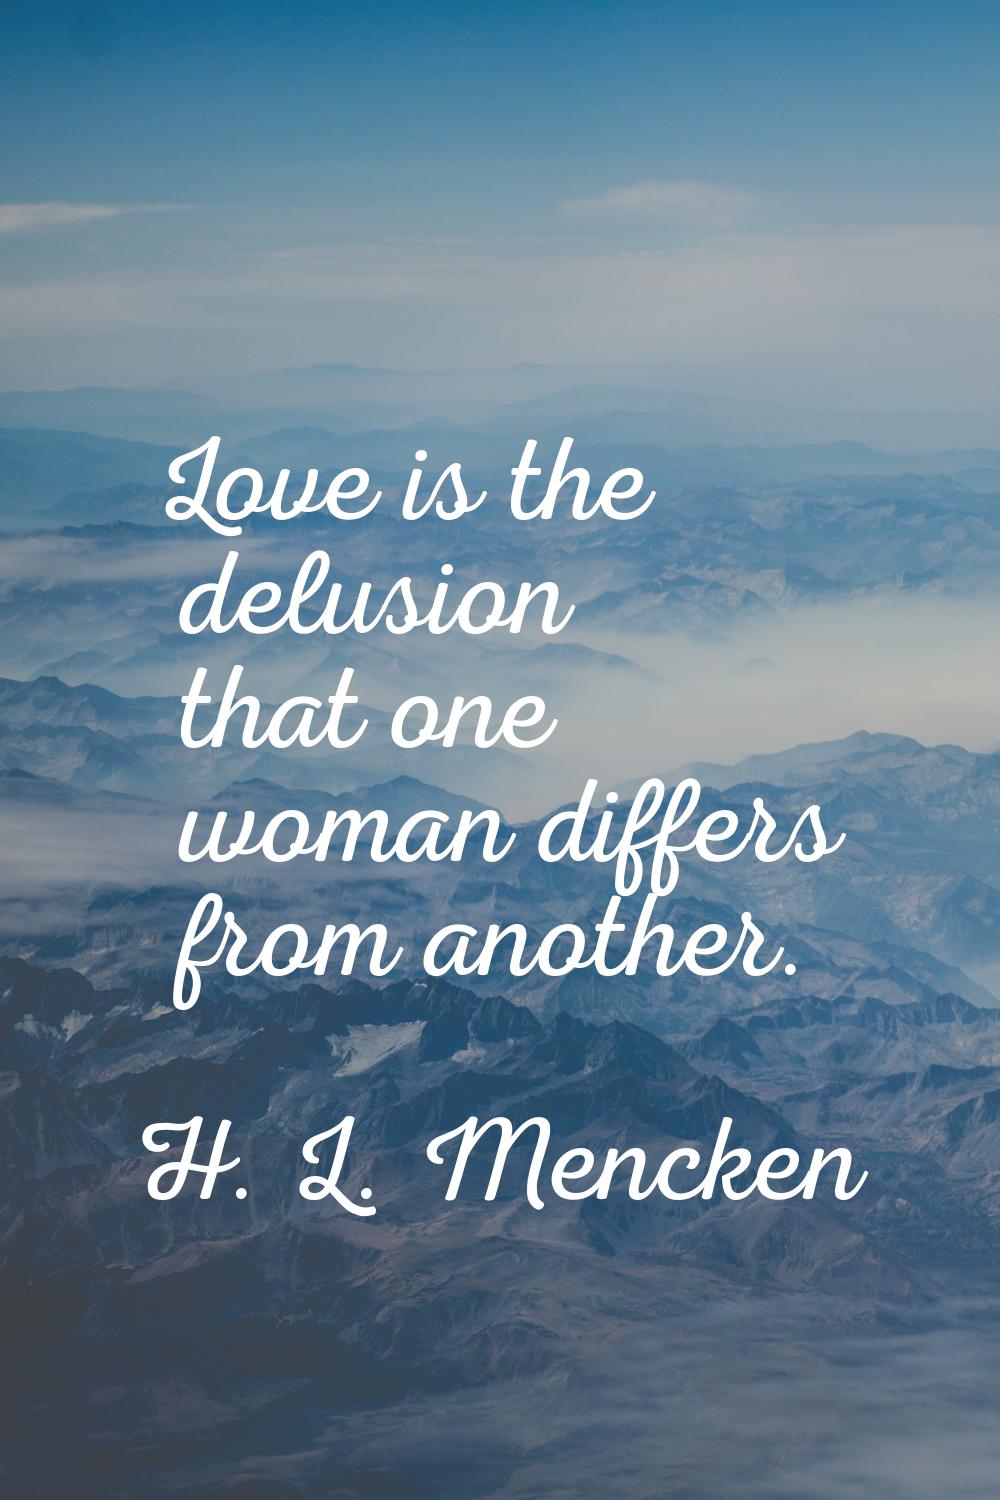 Love is the delusion that one woman differs from another.